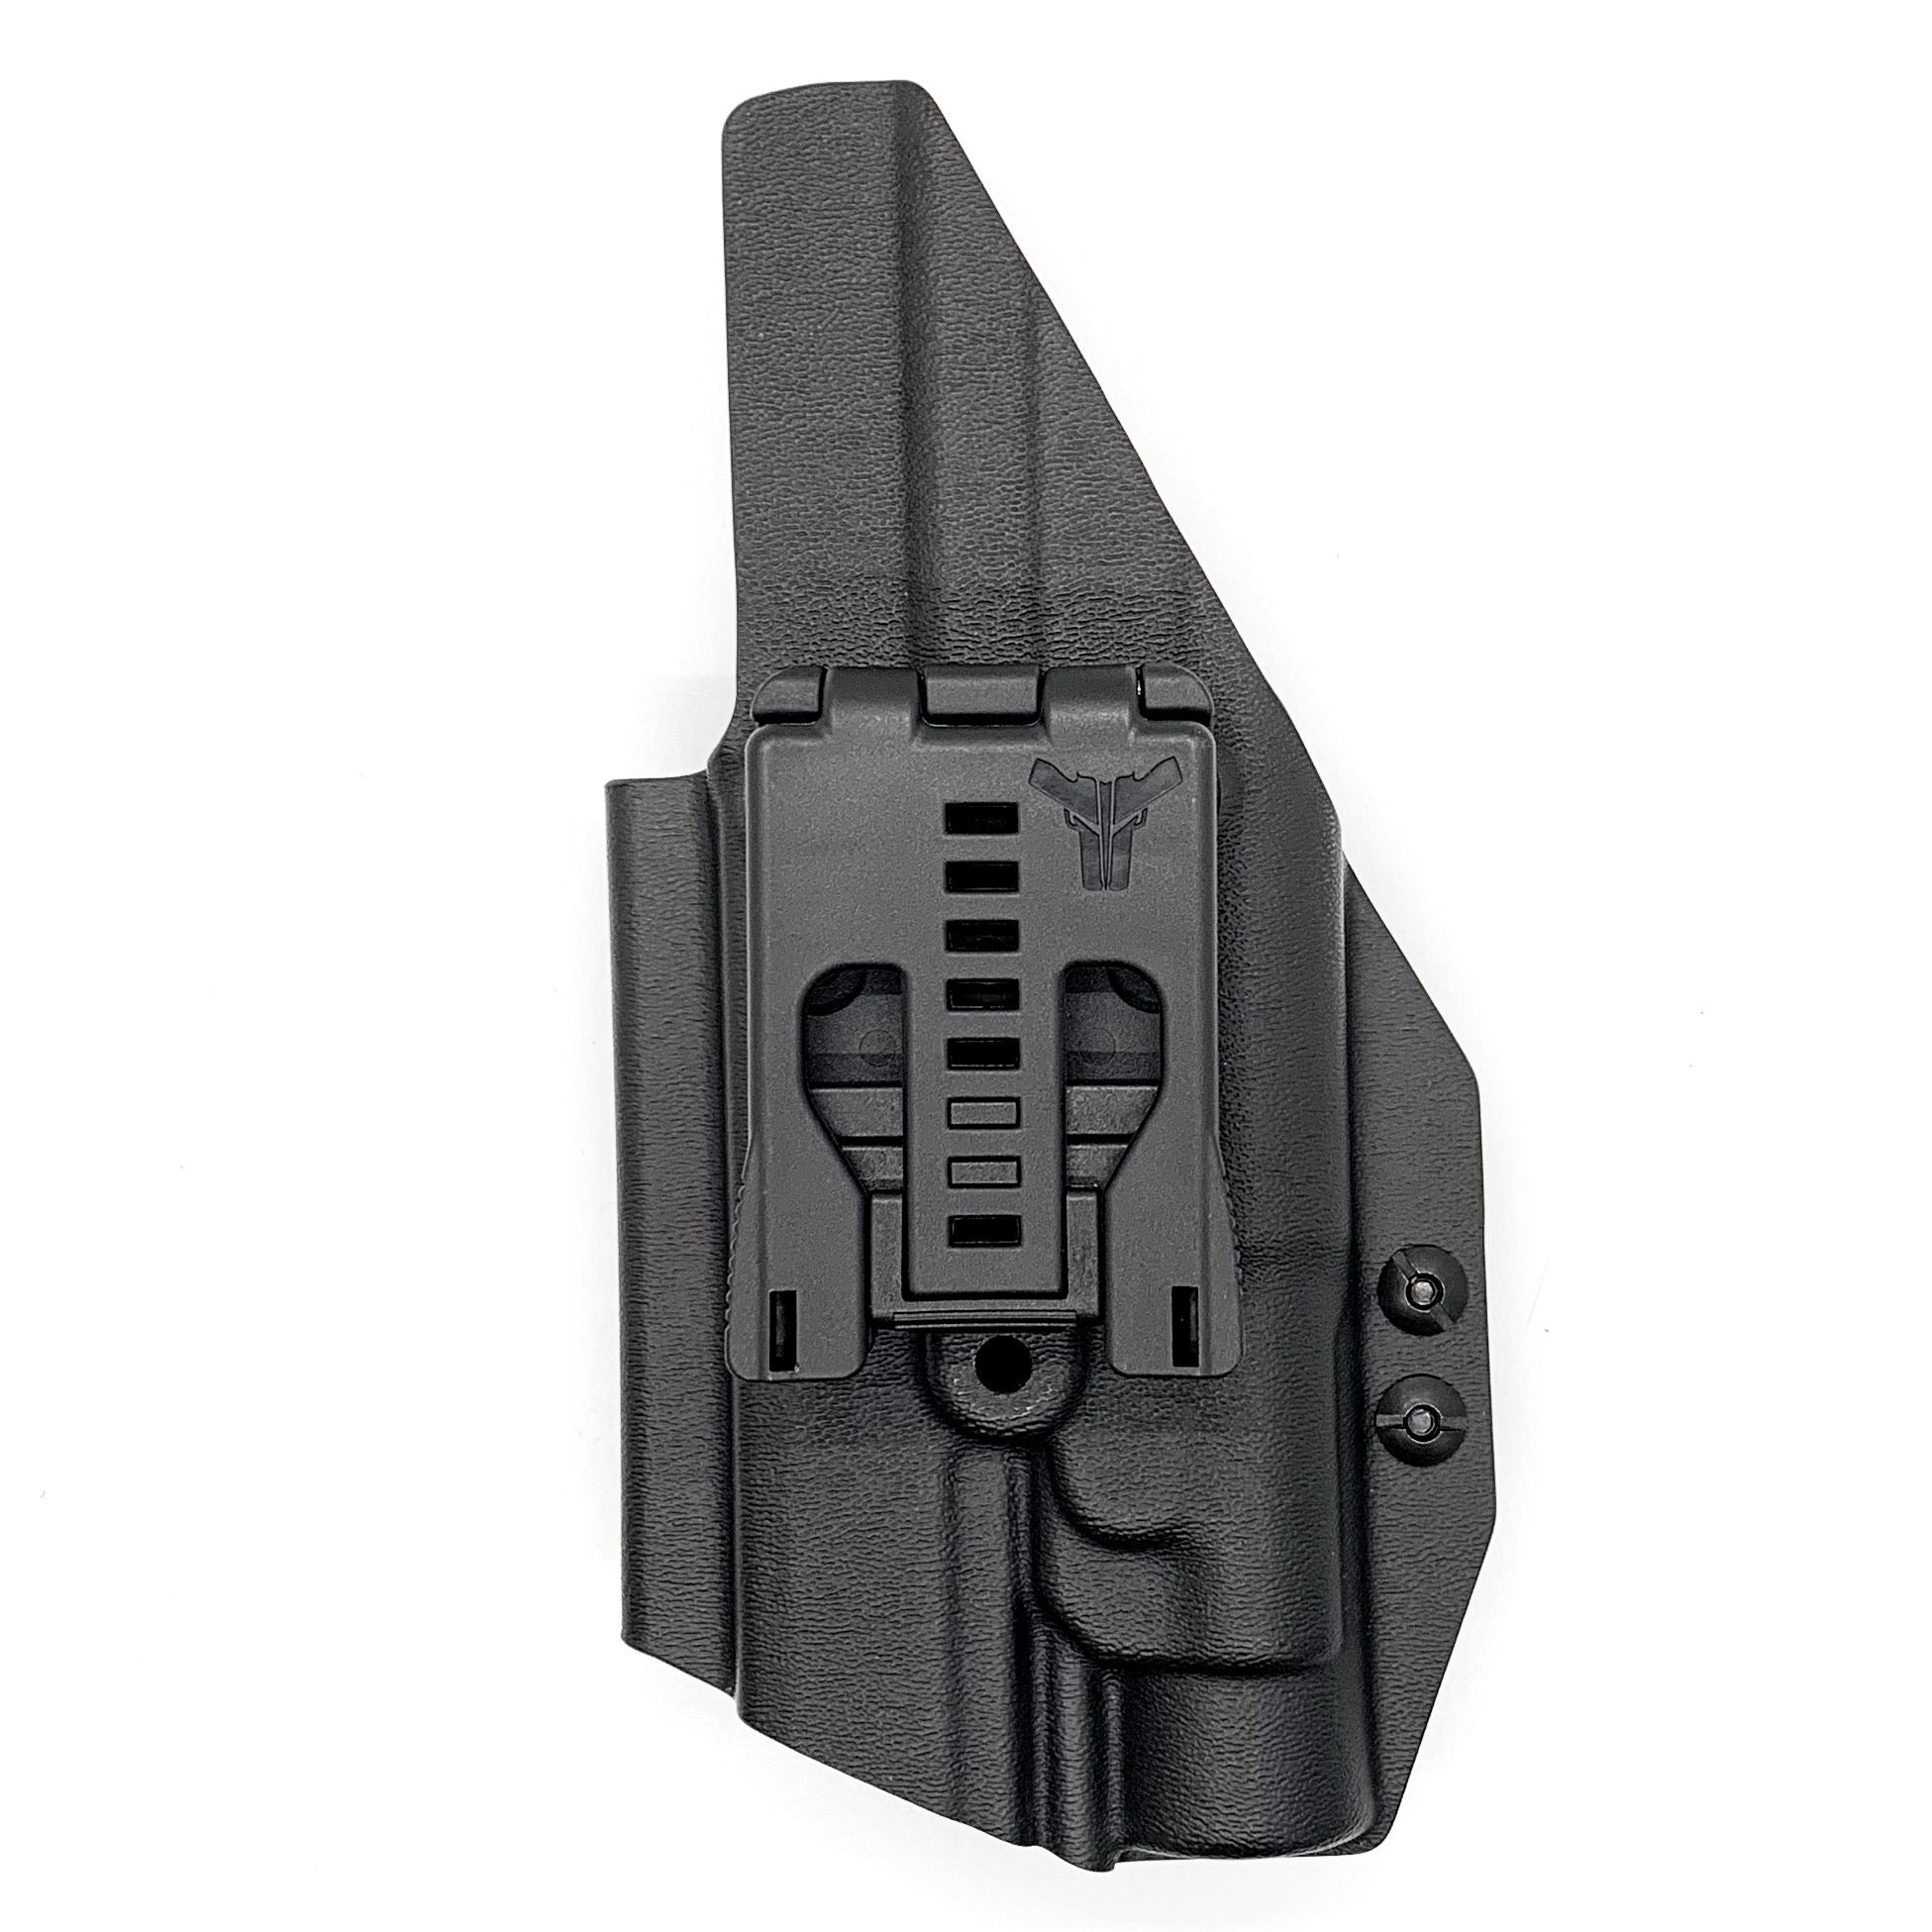 For the best Outside Waistband Taco Style Holster designed to fit the Walther PDP 4" or 4.5" Full-Size pistol with the Streamlight TLR-1 or TLR-1HL installed on the firearm, shop Four Brothers Holsters. Cut for red dot sight, full sweat guard, adjustable retention & open muzzle for threaded barrels & compensators. 